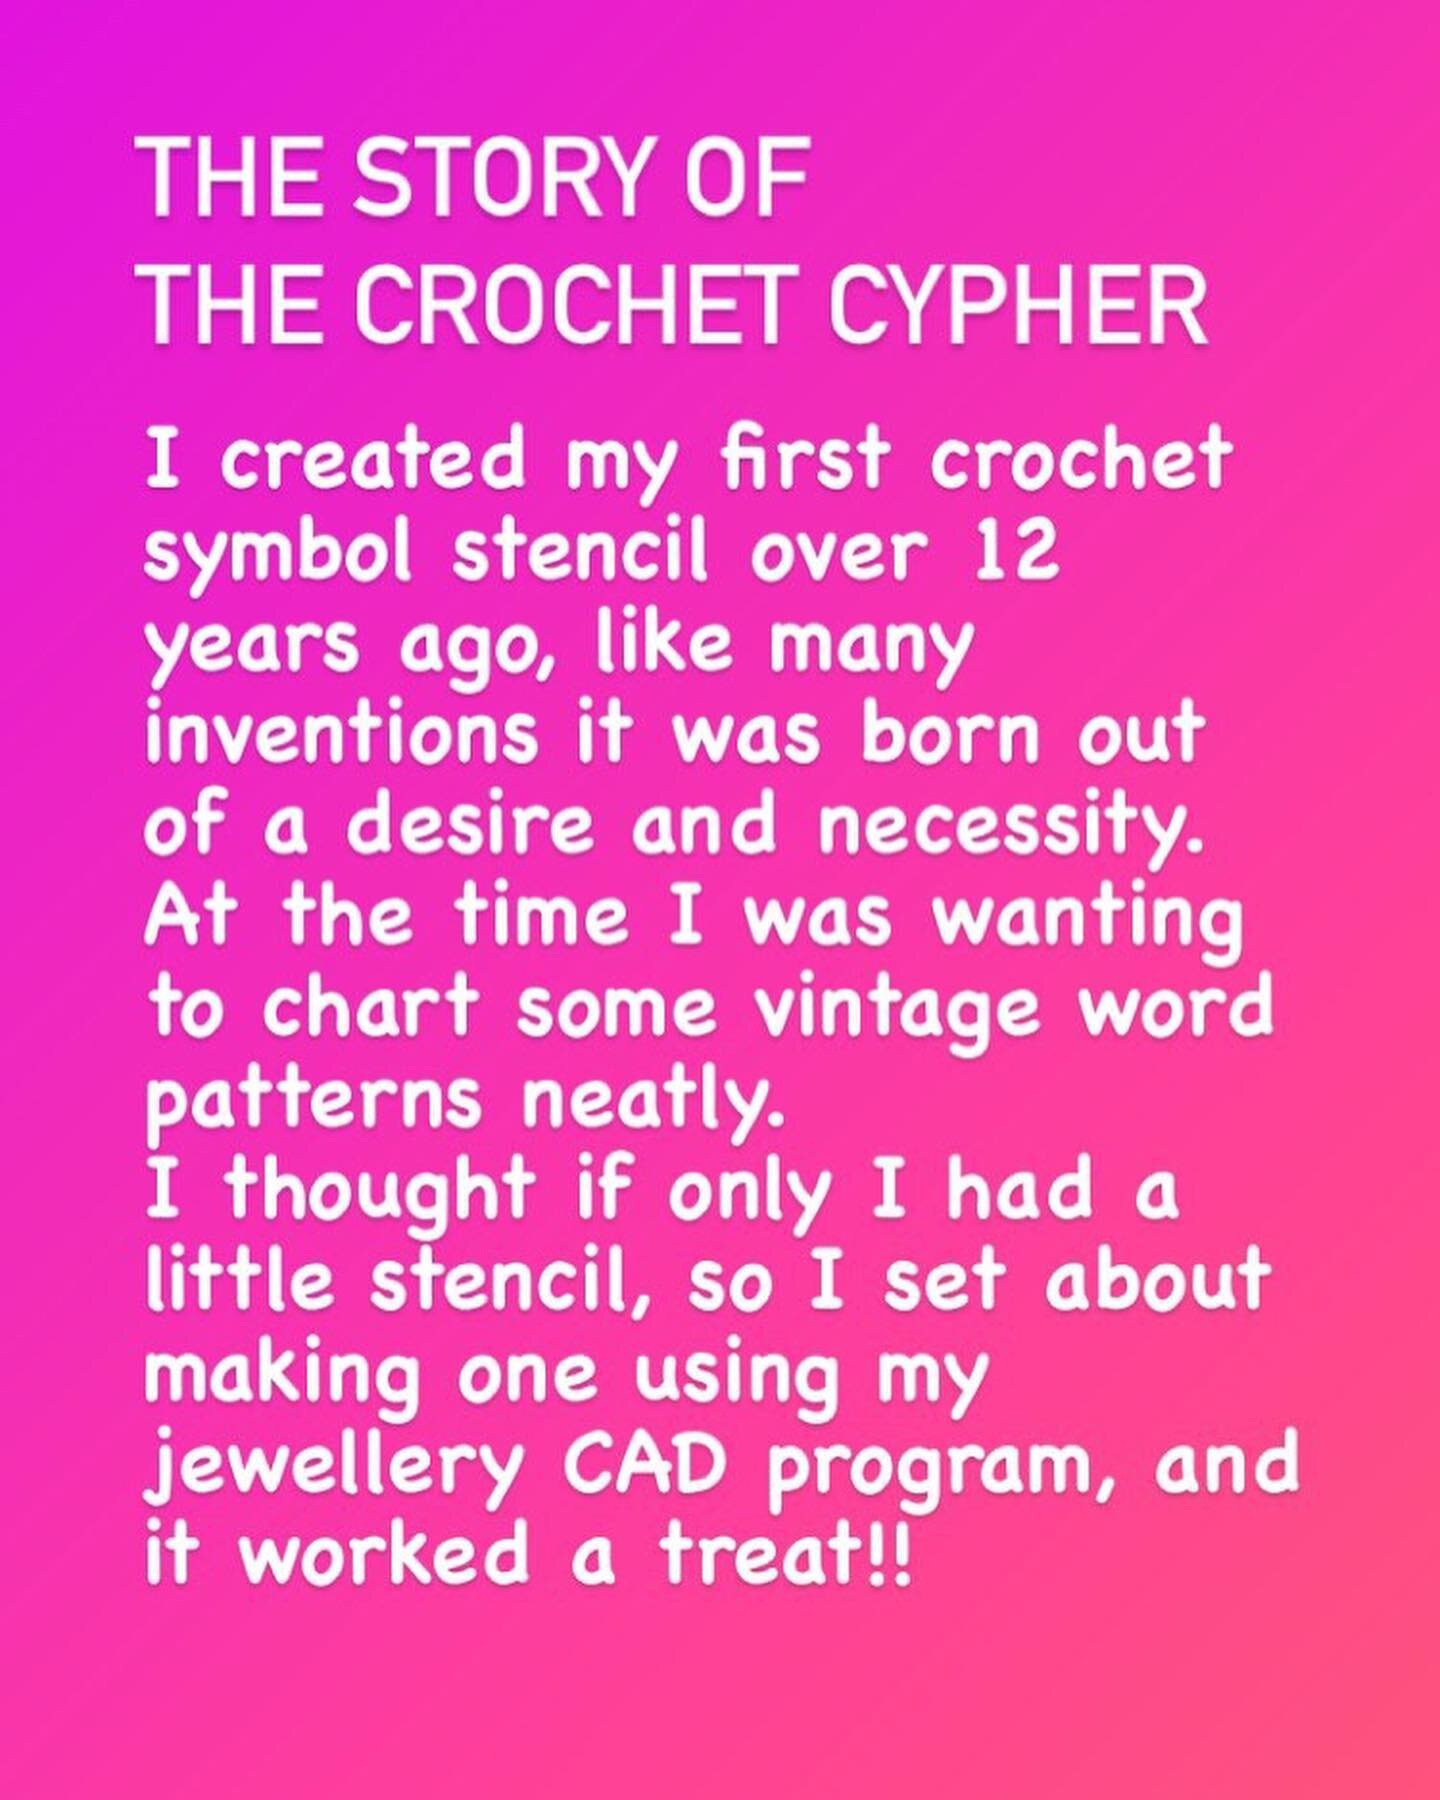 I created my first crochet symbol stencil over 12 years ago, like many inventions it was born out of a desire and necessity. At the time I was wanting to chart some vintage word patterns neatly. 
I thought if only I had a little stencil, so I set ab